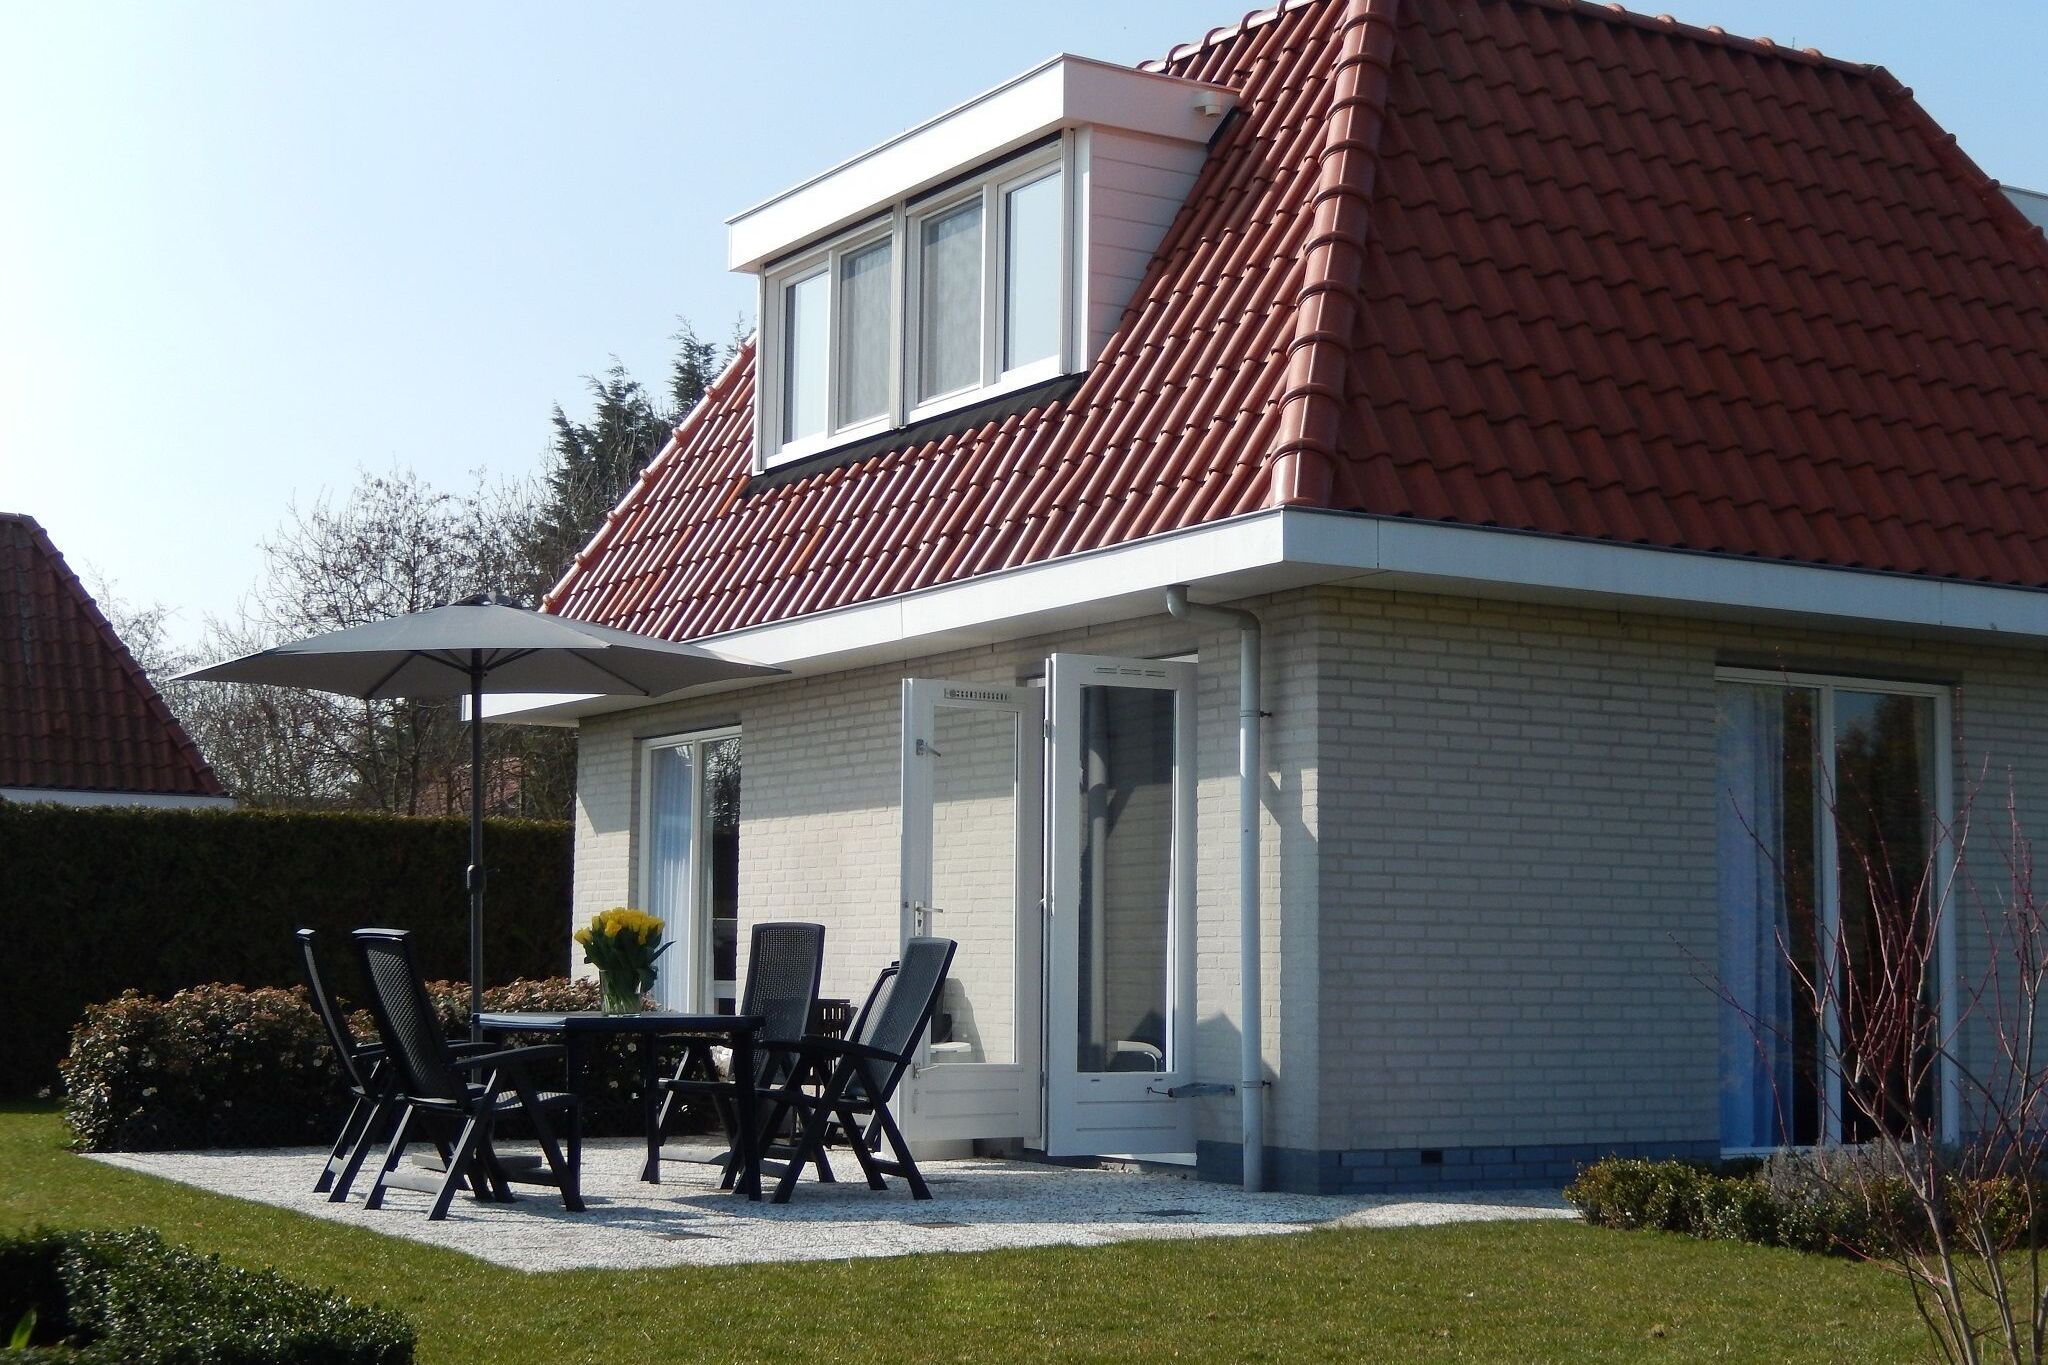 Detached house with garden, 1.5 km from the sea